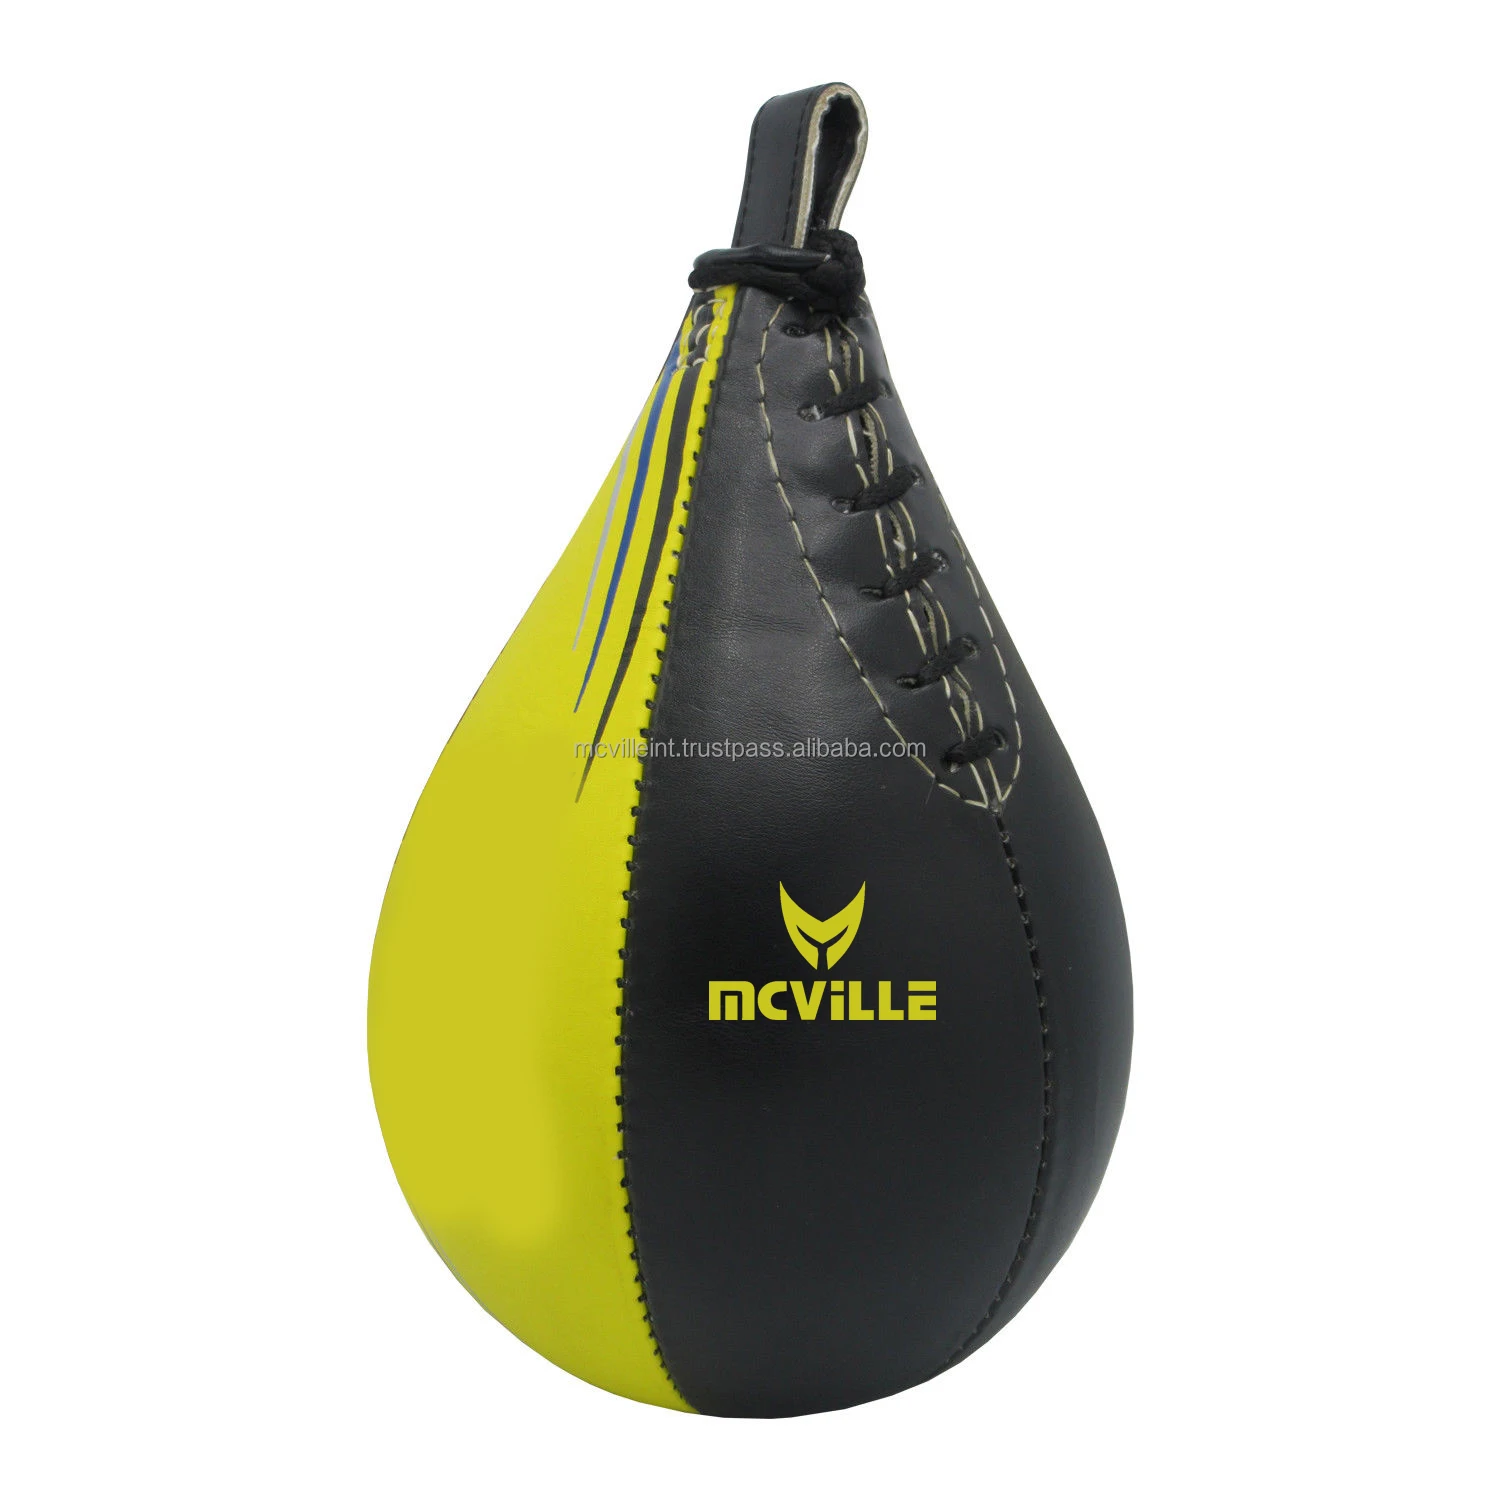 Lightweight Speed Boxing Ball Hanging Punching Ball Boxing Speed Bag with Hook & Pump TOBWOLF Speed Bag for Boxing Hanging Striking Bag for Men Women PU Leather Speed Punching Bag 